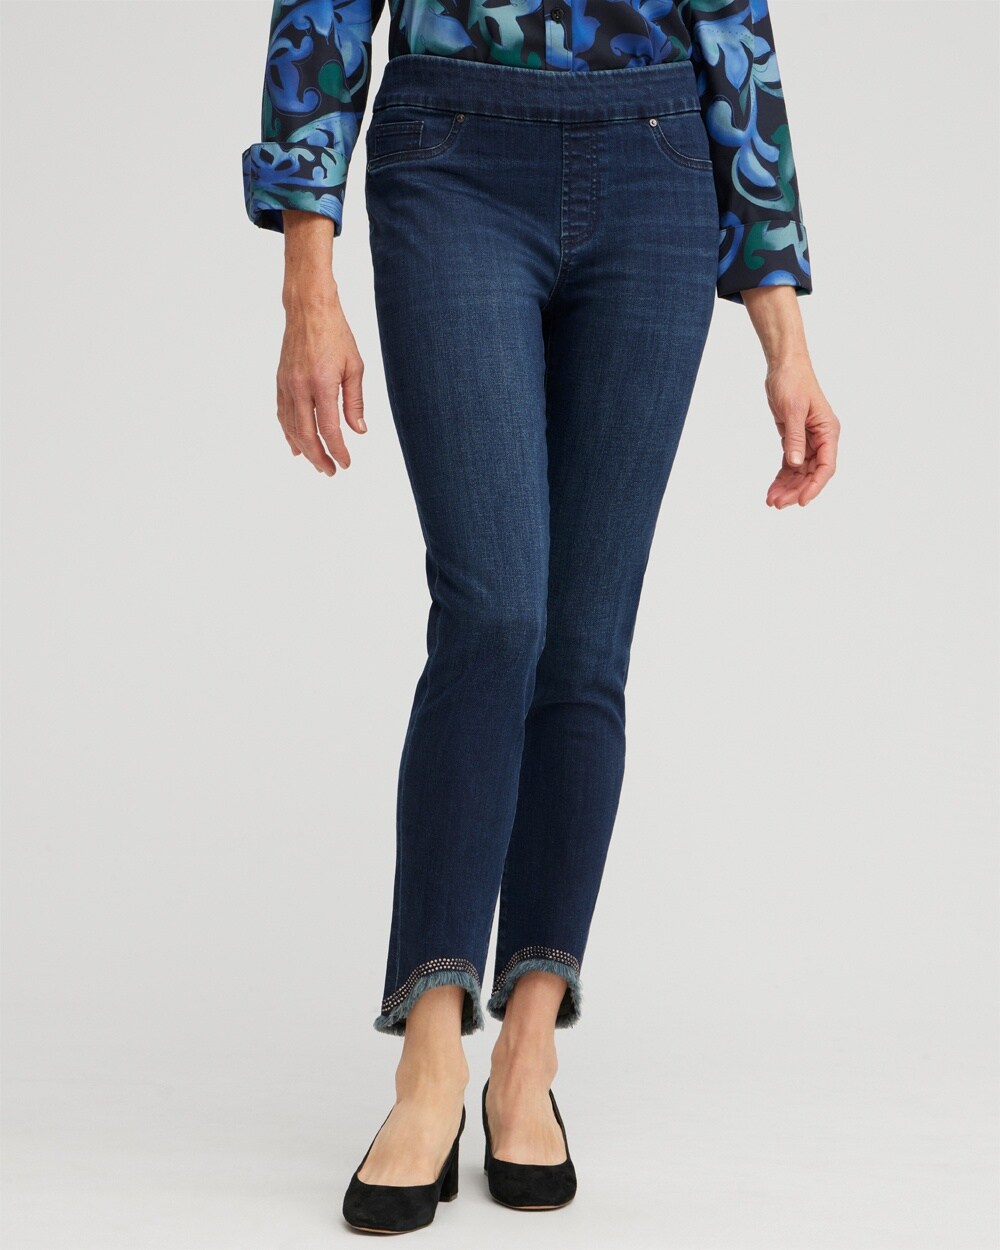 Petite Embellished Tulip Hem Pull-on Jeggings video preview image, click to start video